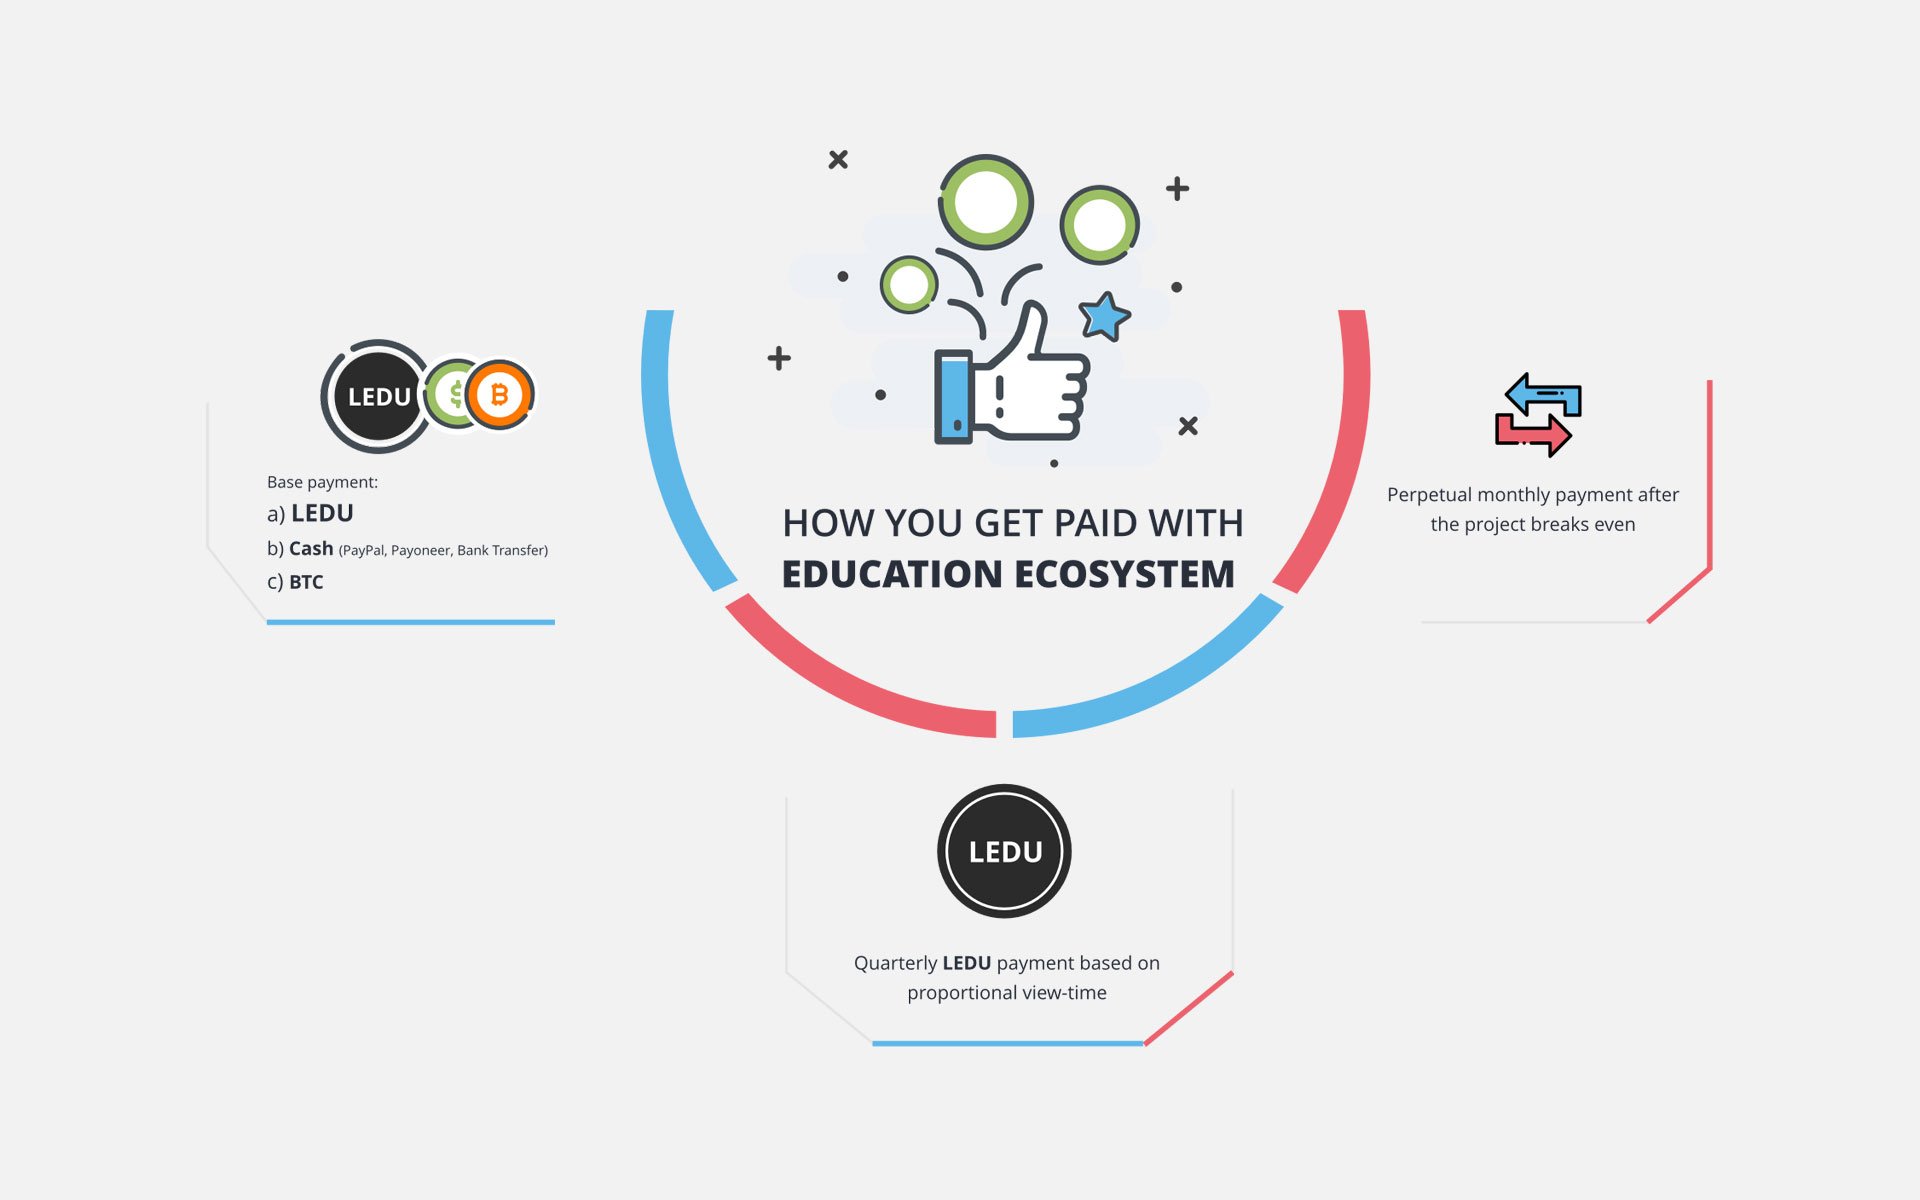 How You Get Paid on Education Ecosystem